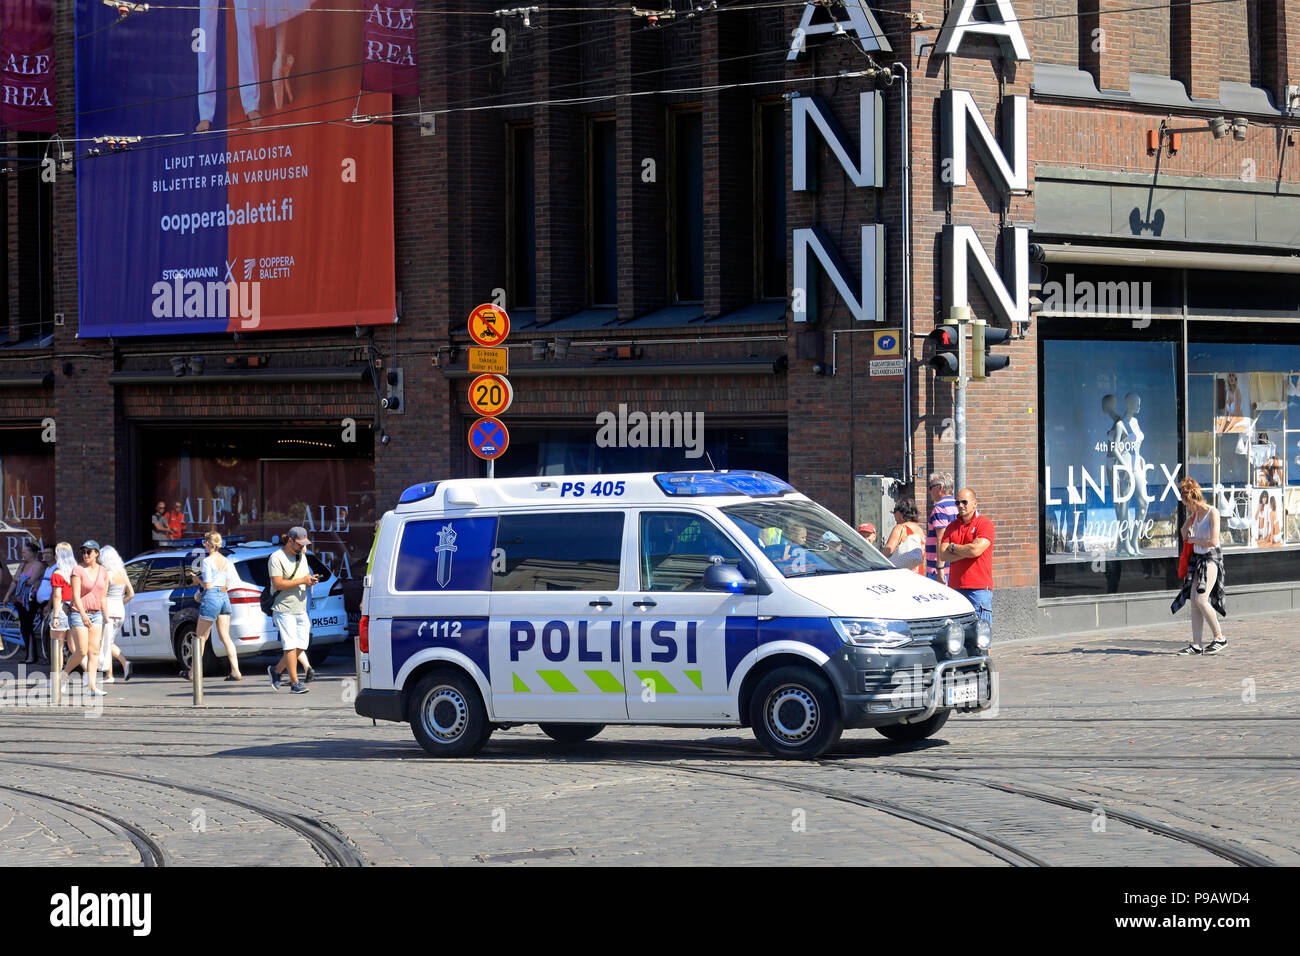 Helsinki, Finland. July 16, 2018. Police officers and vehicles in central Helsinki on the day of the US and Russian Presidents' historic Helsinki2018 meeting. Credit: Taina Sohlman/Alamy Live News Stock Photo